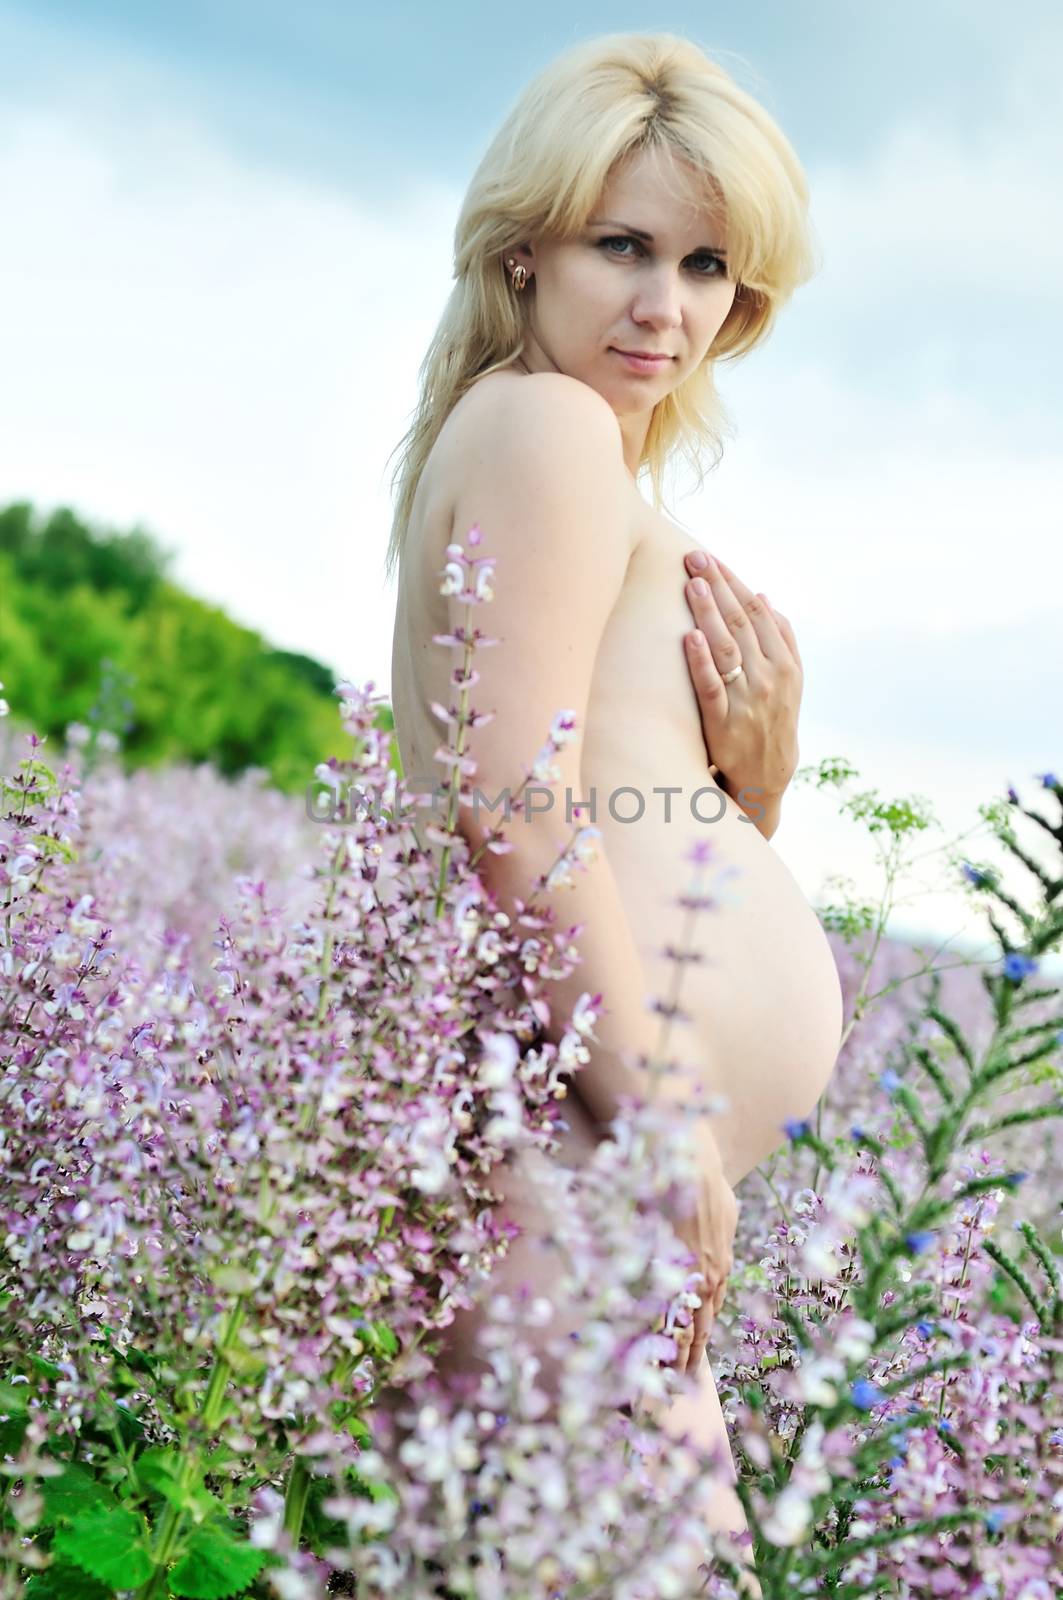 beauty blonde pregnant woman at one with nature